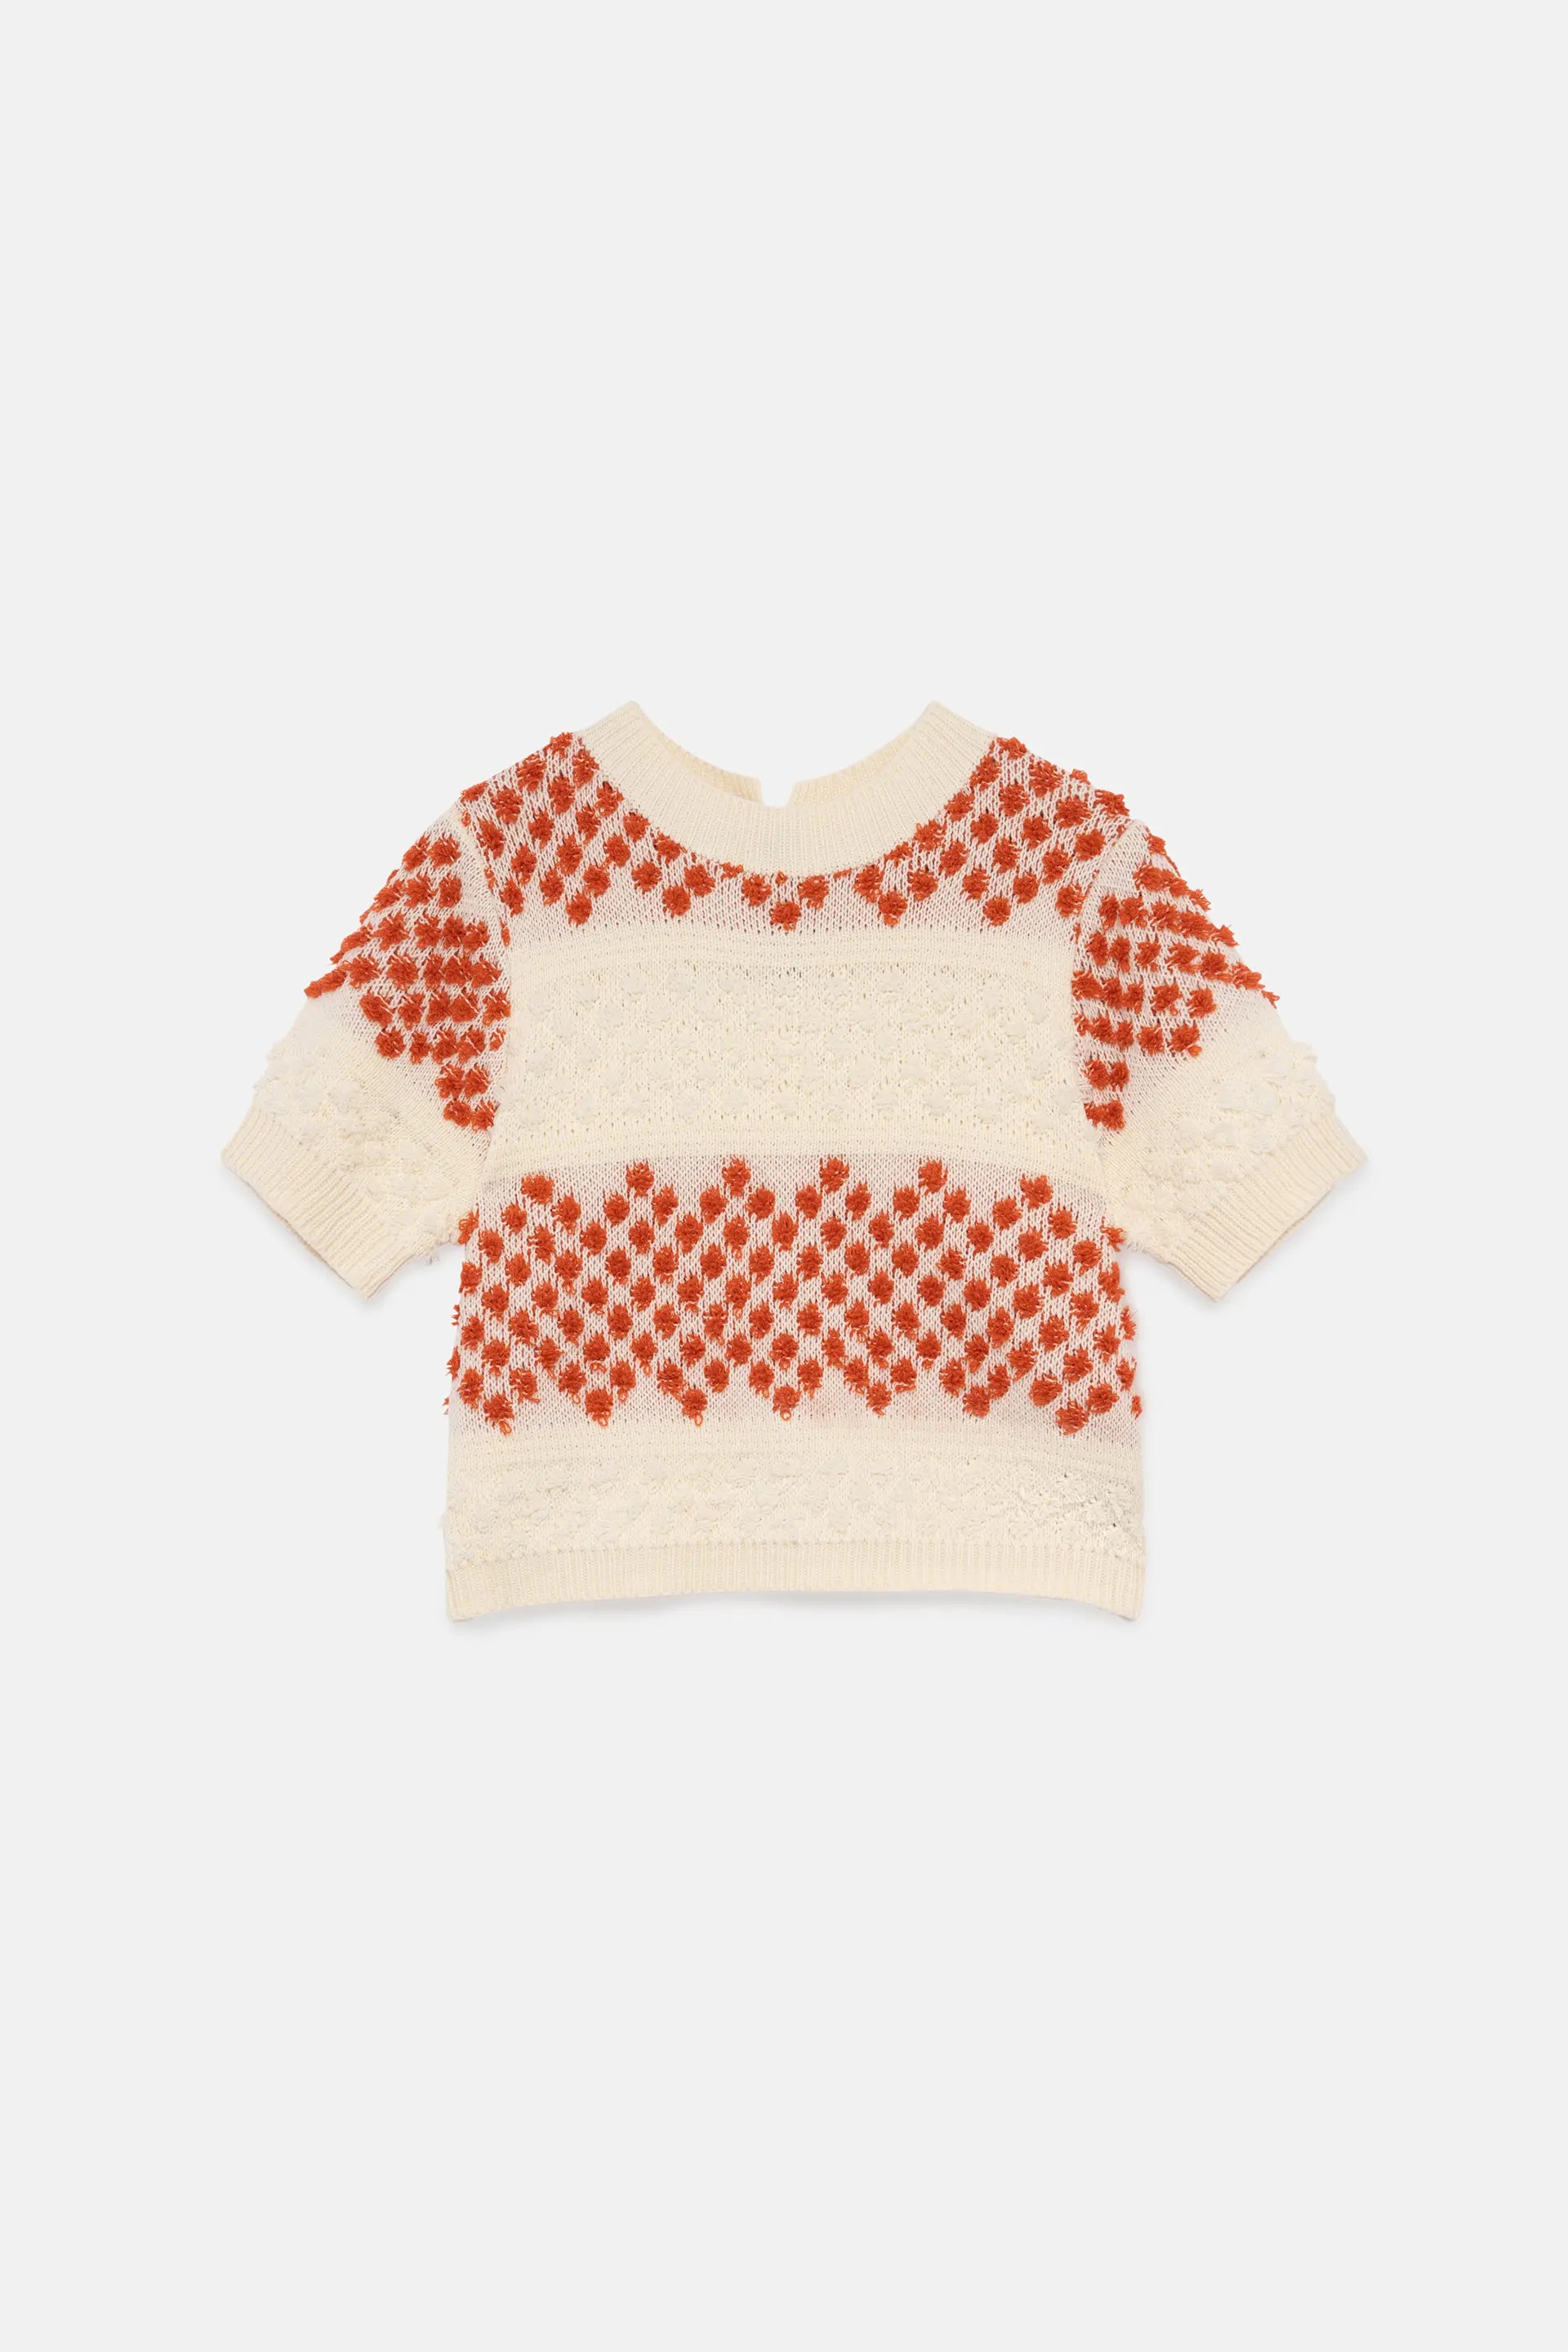 Wild Pony Orange short sleeve knitted sweater - clever alice